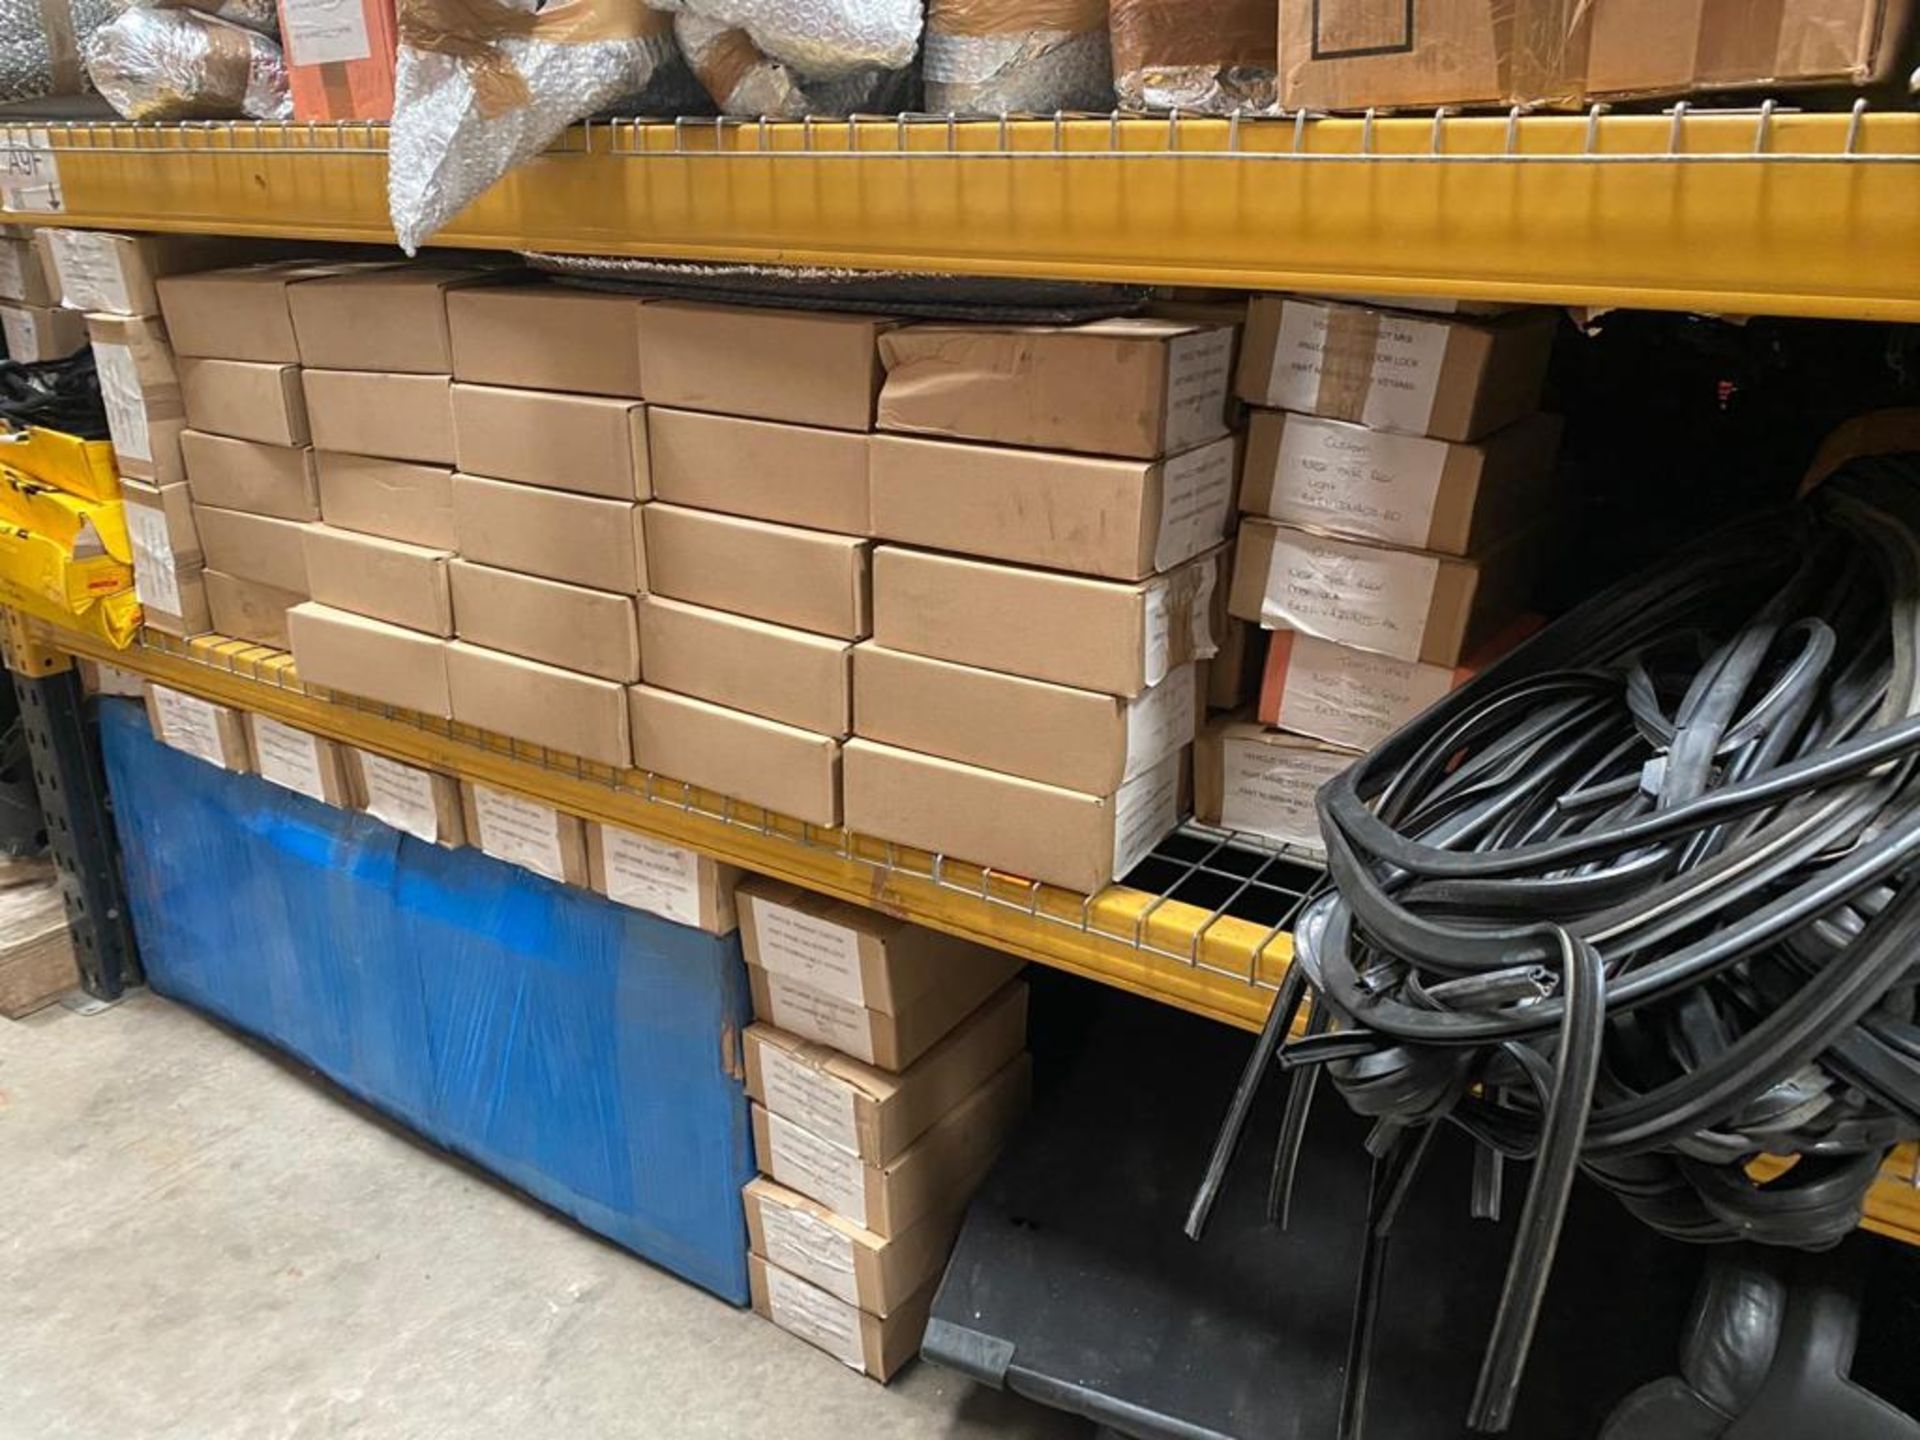 BULK ITEMS JOB LOT OF USED CAR PARTS - £350K ONGOING BUSINESS STOCK CLEARANCE FOR SALE! *NO VAT*